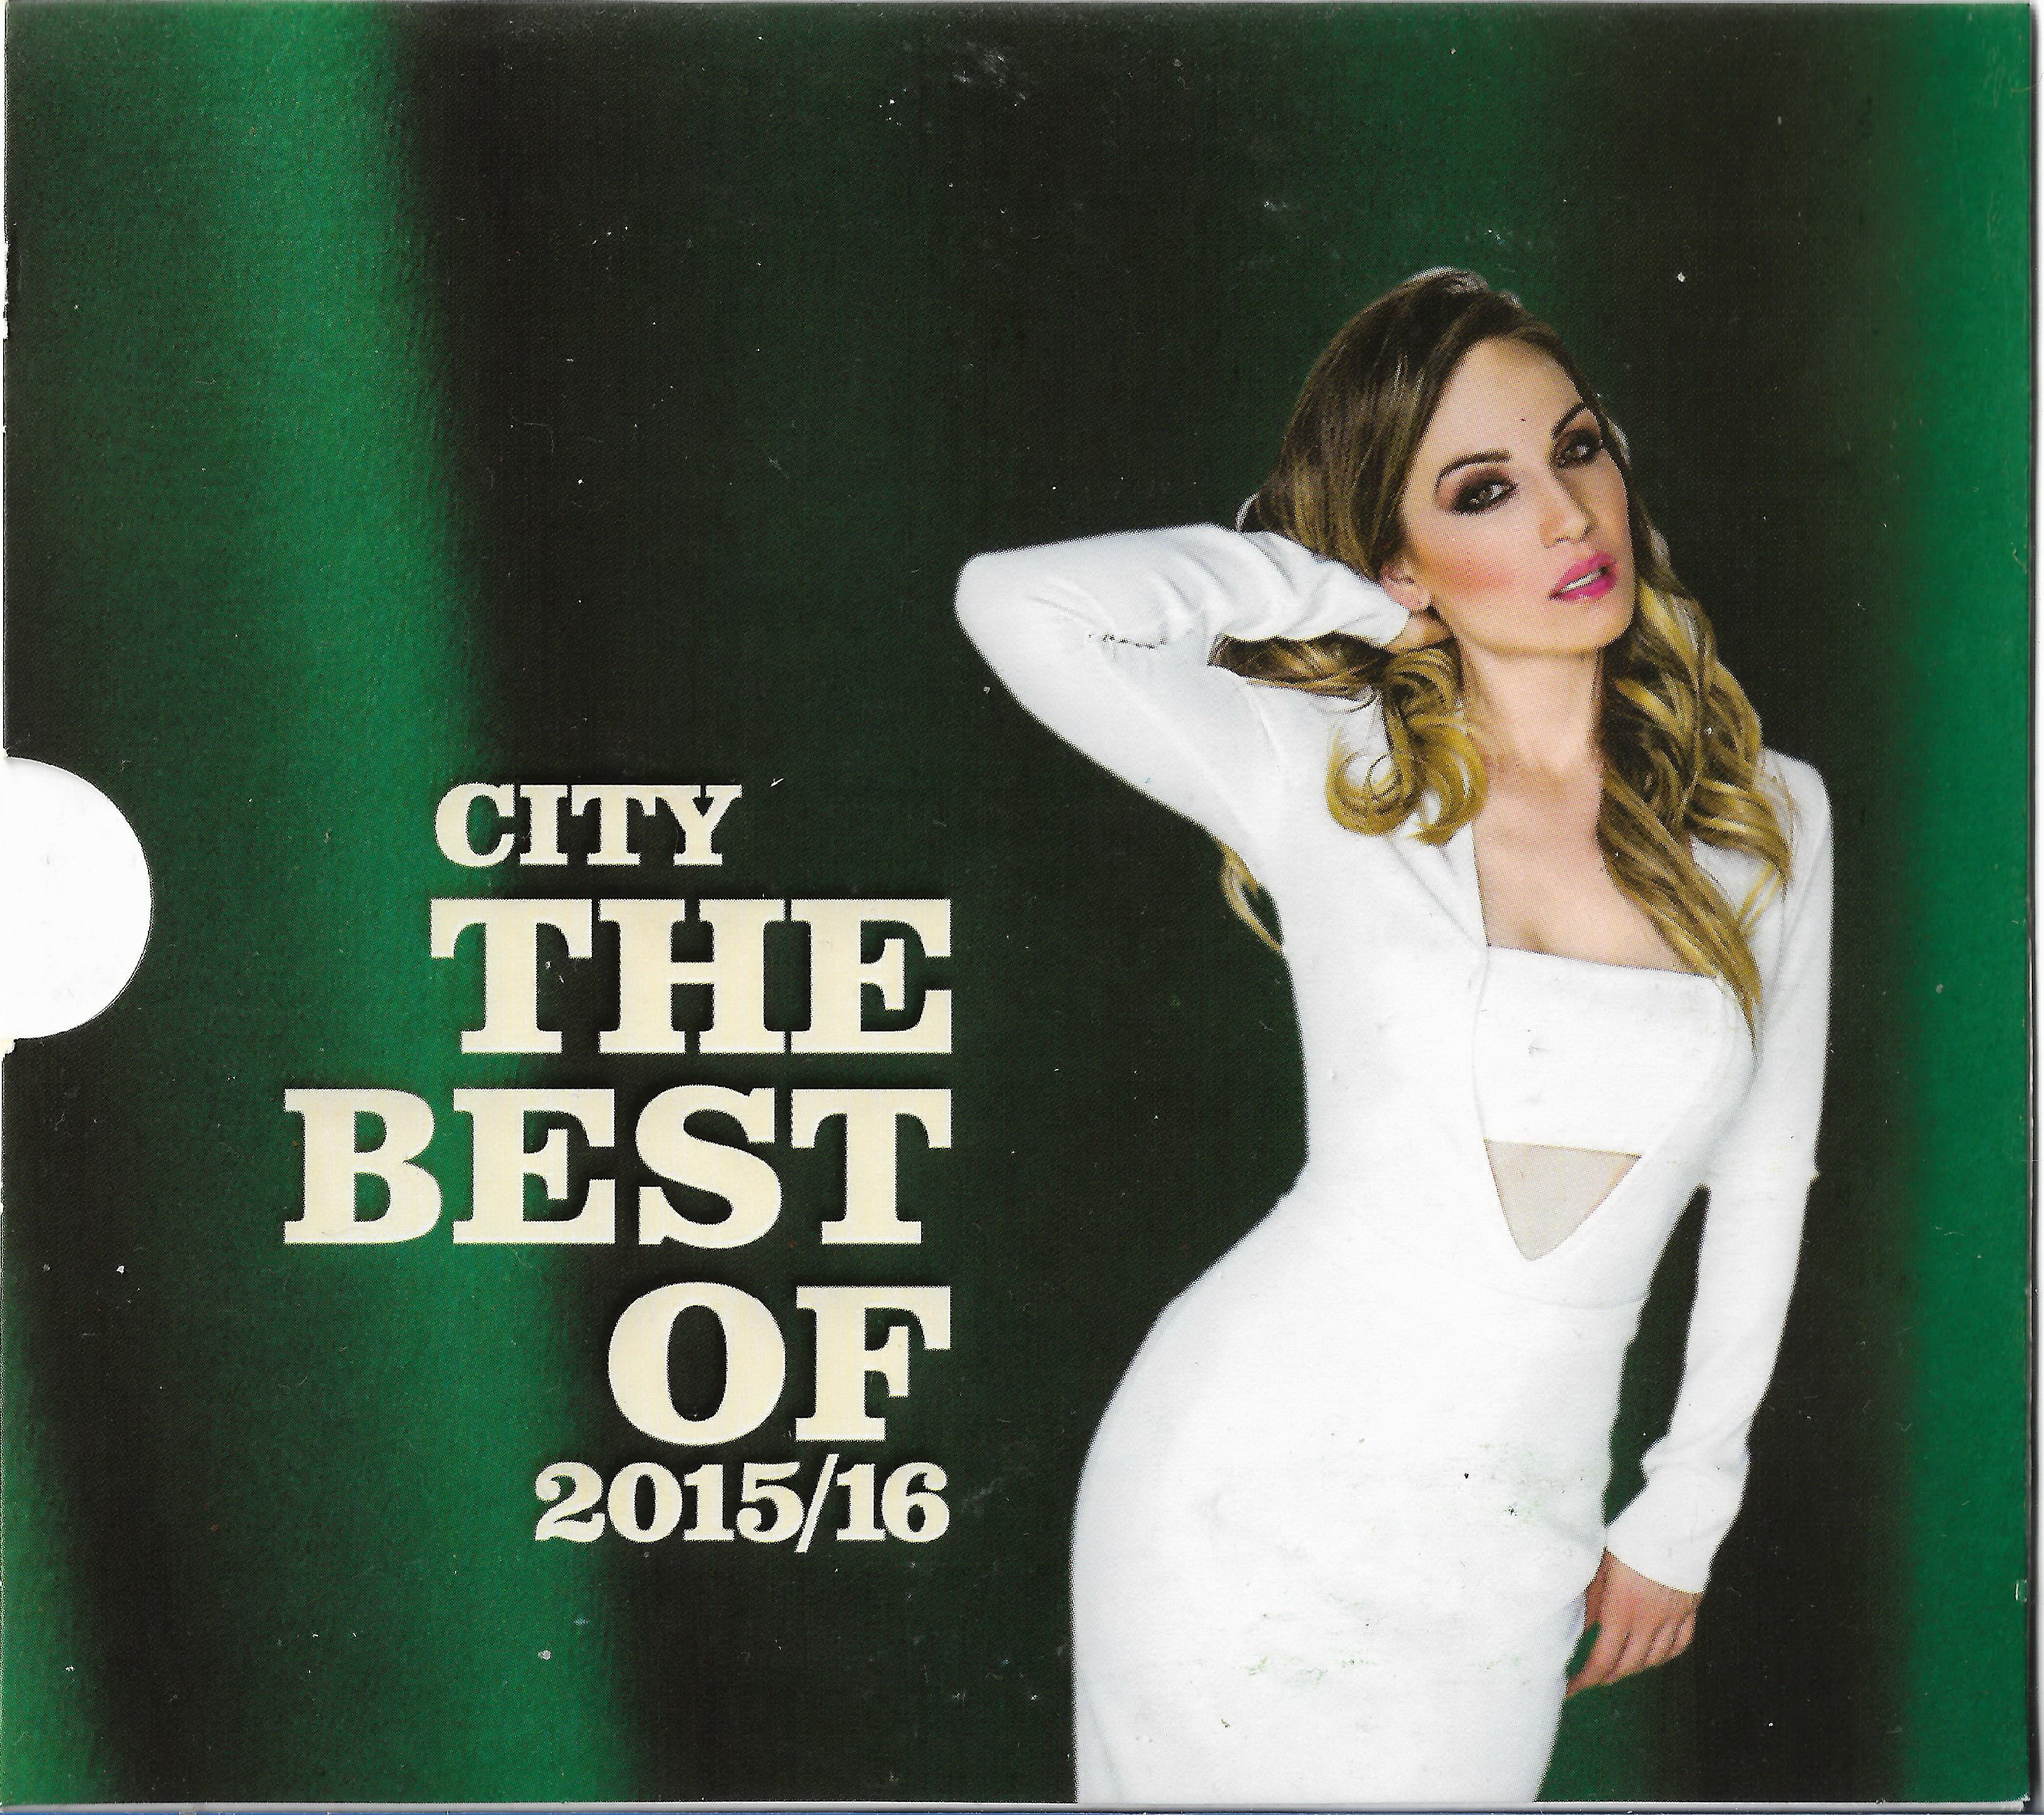 City The Best Of 201516 2 b